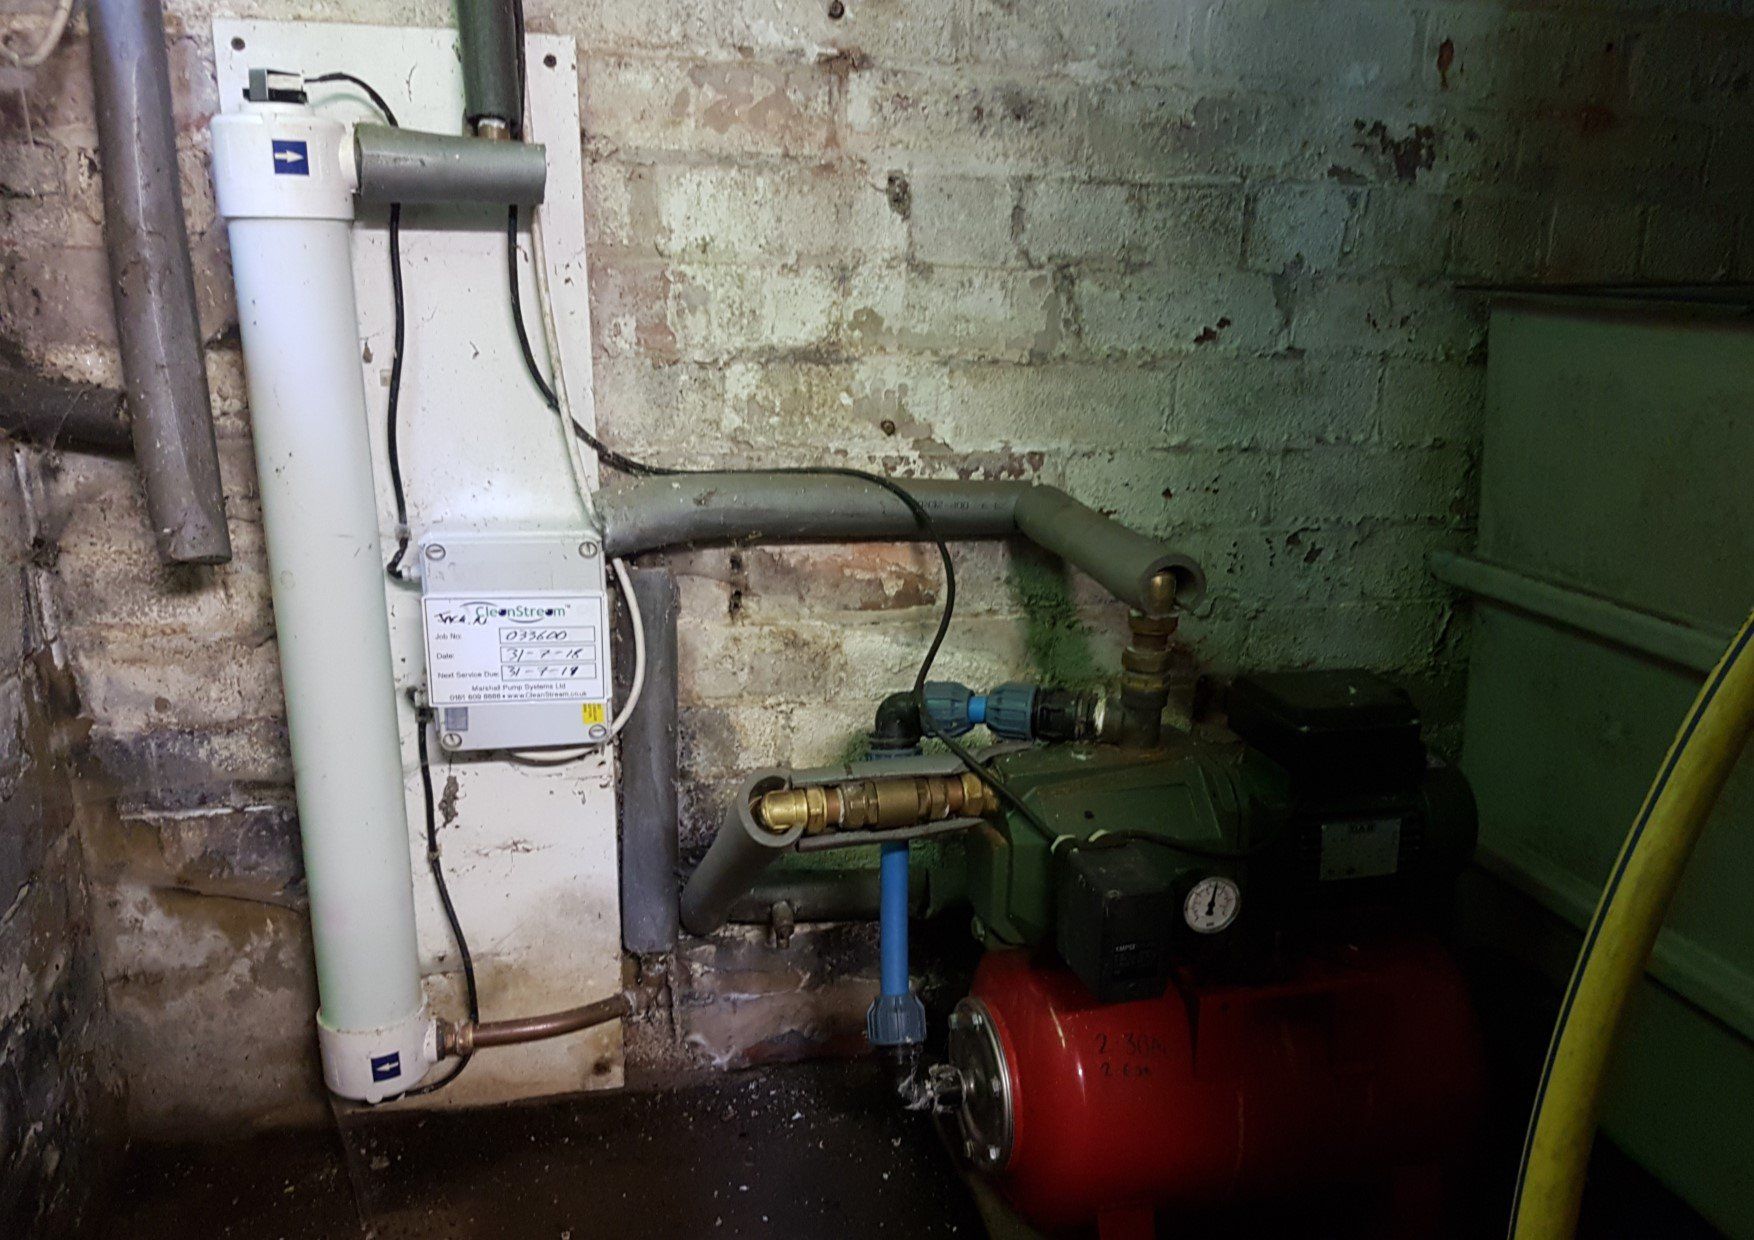 Private Water Supply Installation In Romiley, Cheshire